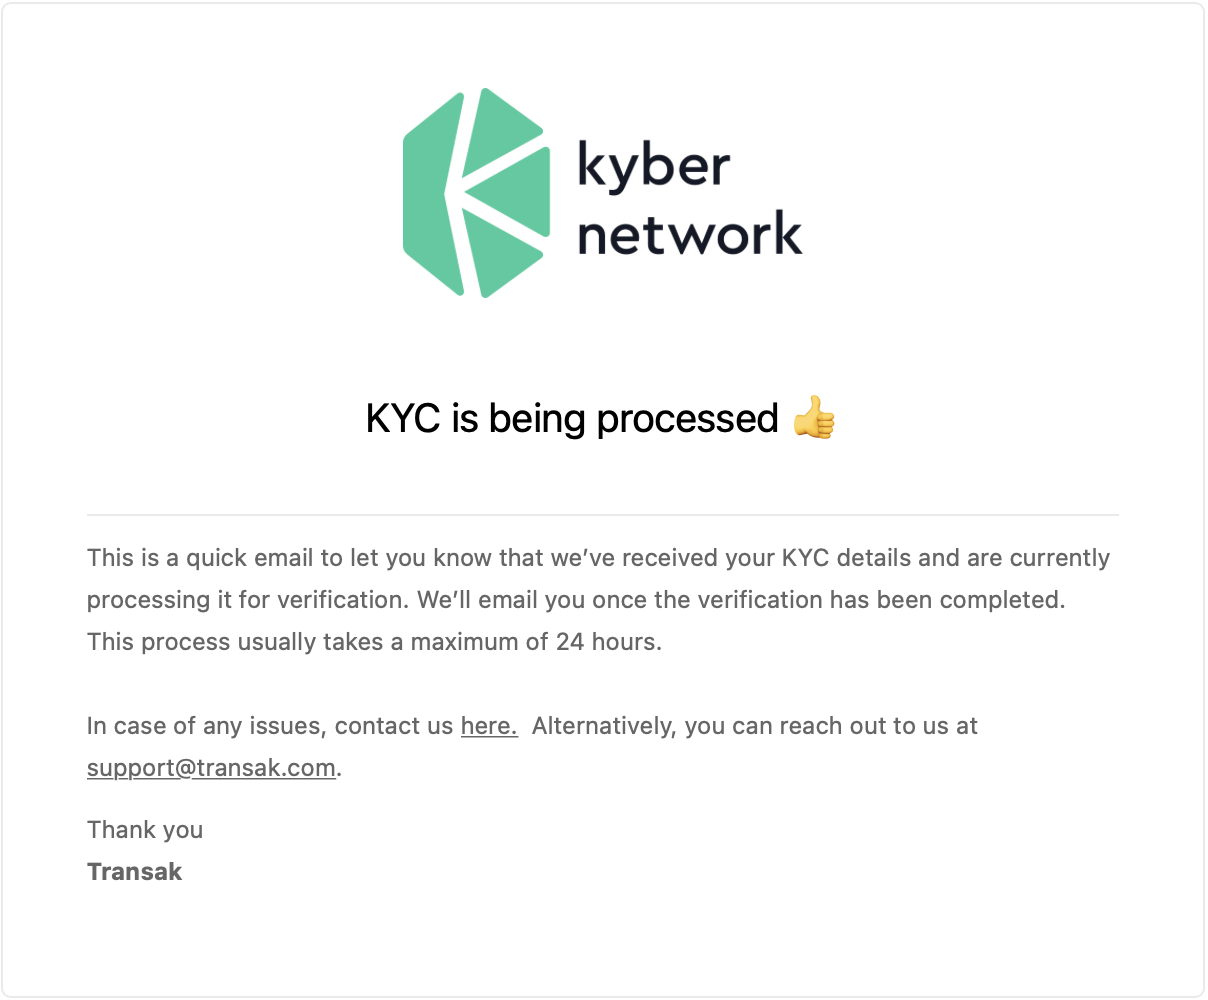 009_KYC_Processing.png